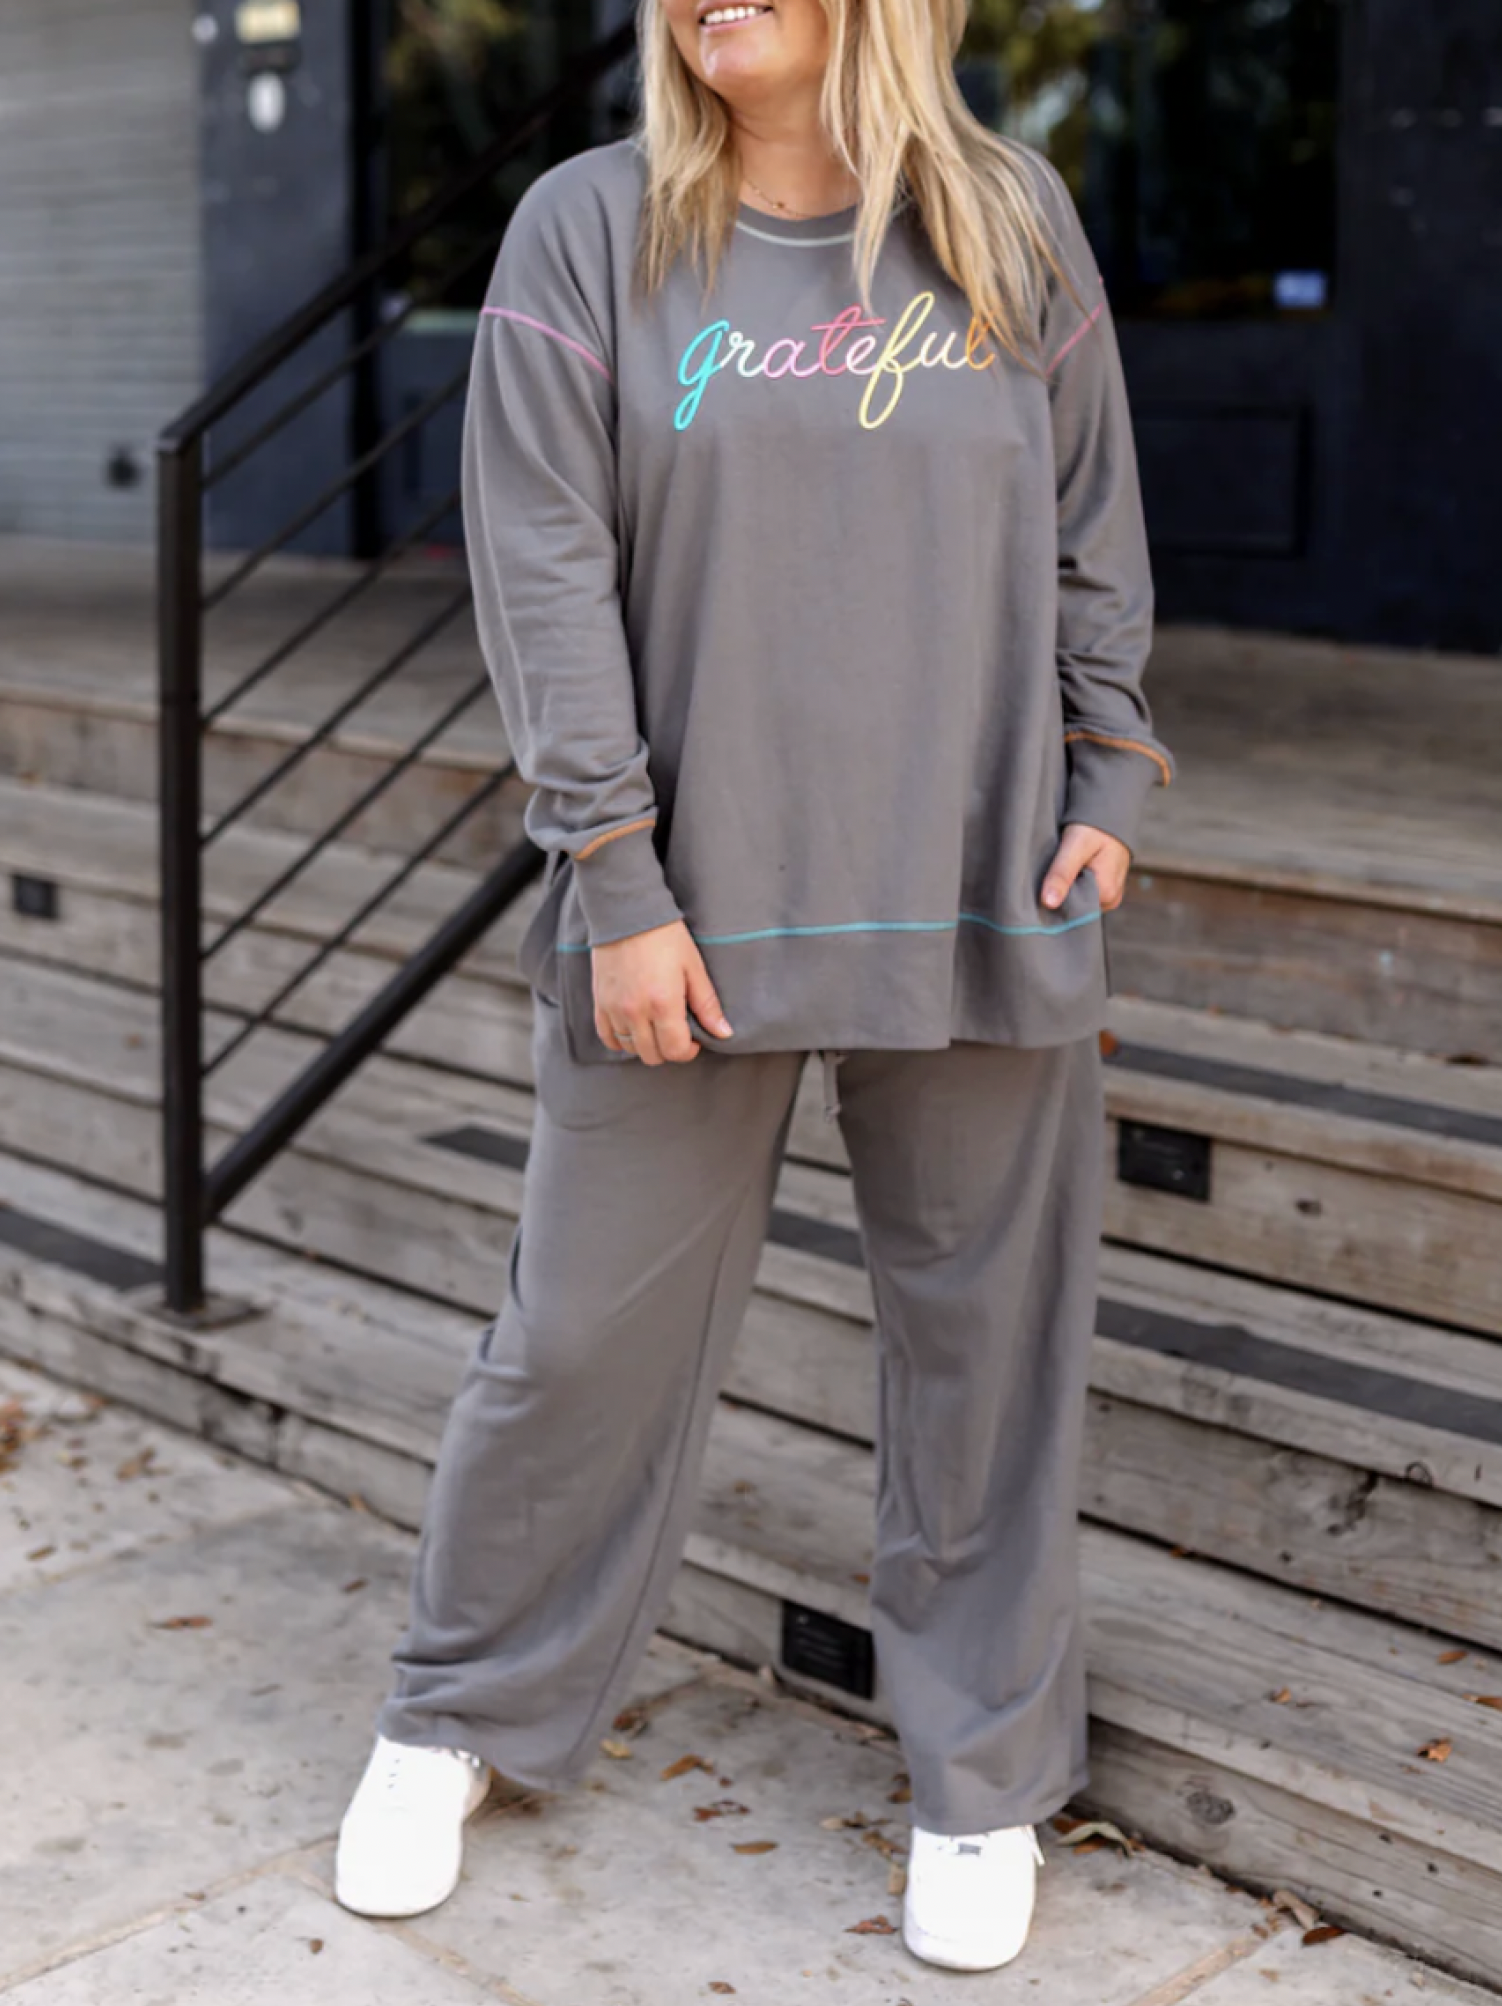 Grateful Pullover & Lounge Pants (Sold Separately)